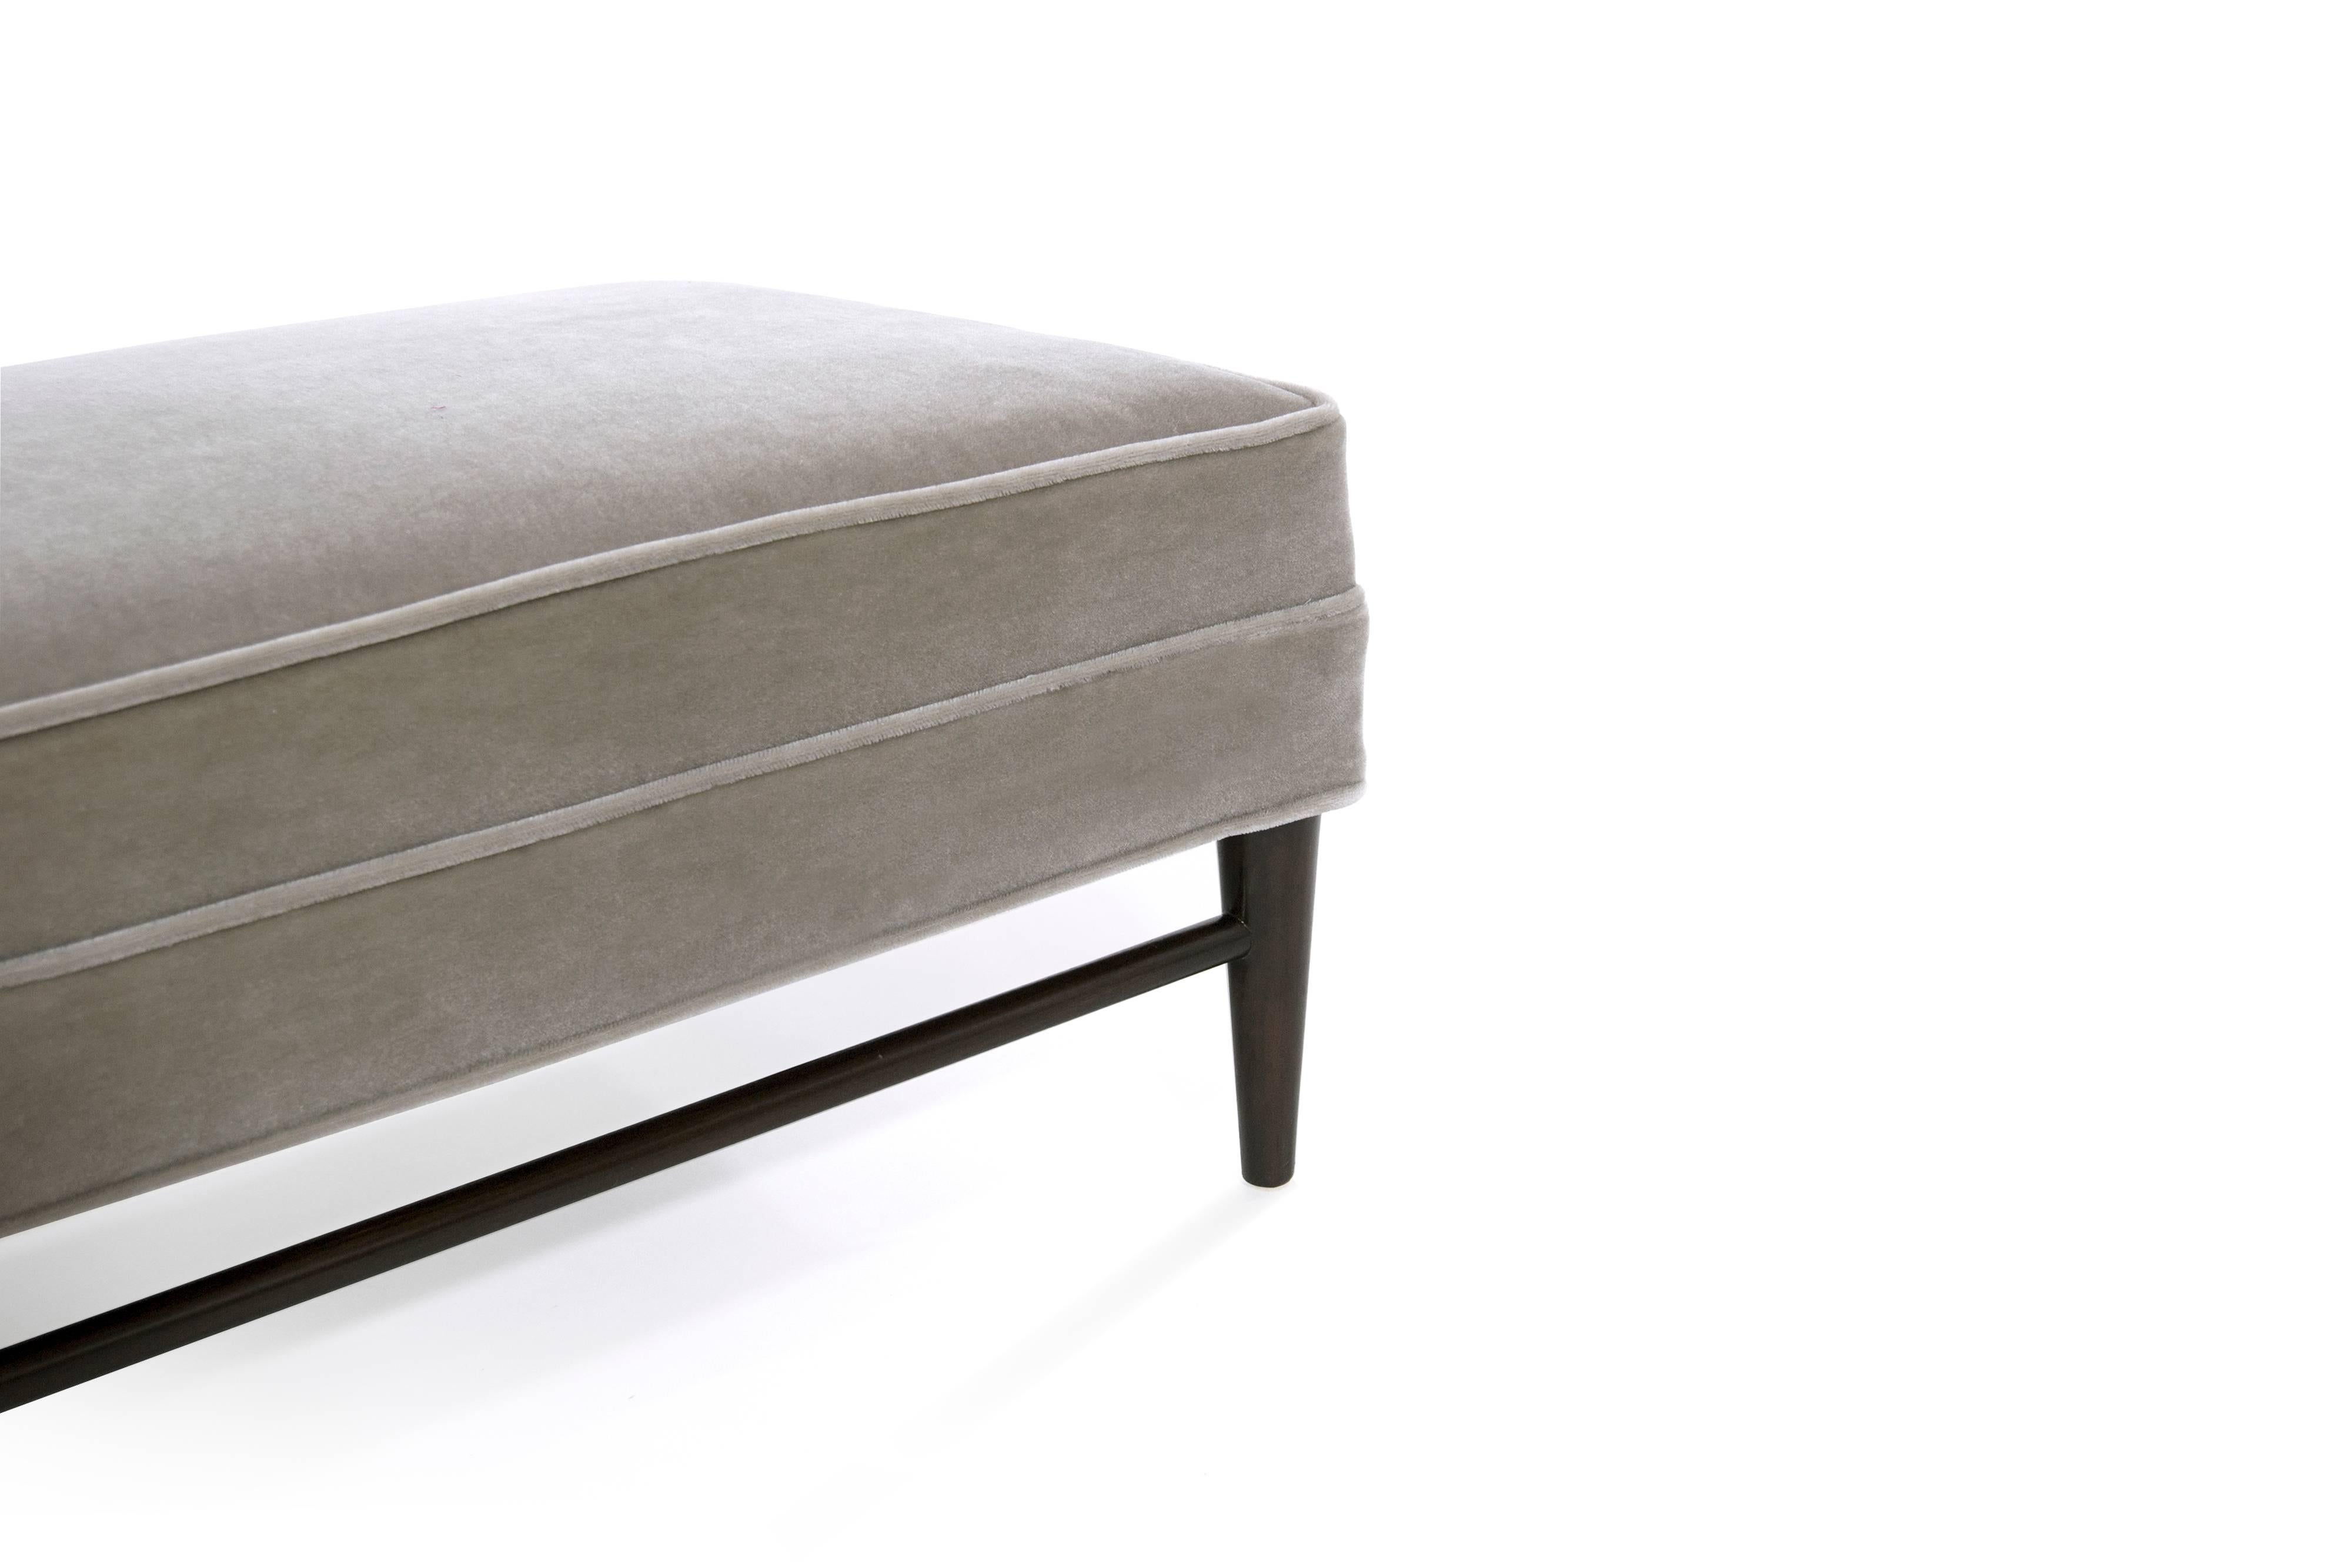 20th Century Paul McCobb for Directional Chaise Lounge in Mohair